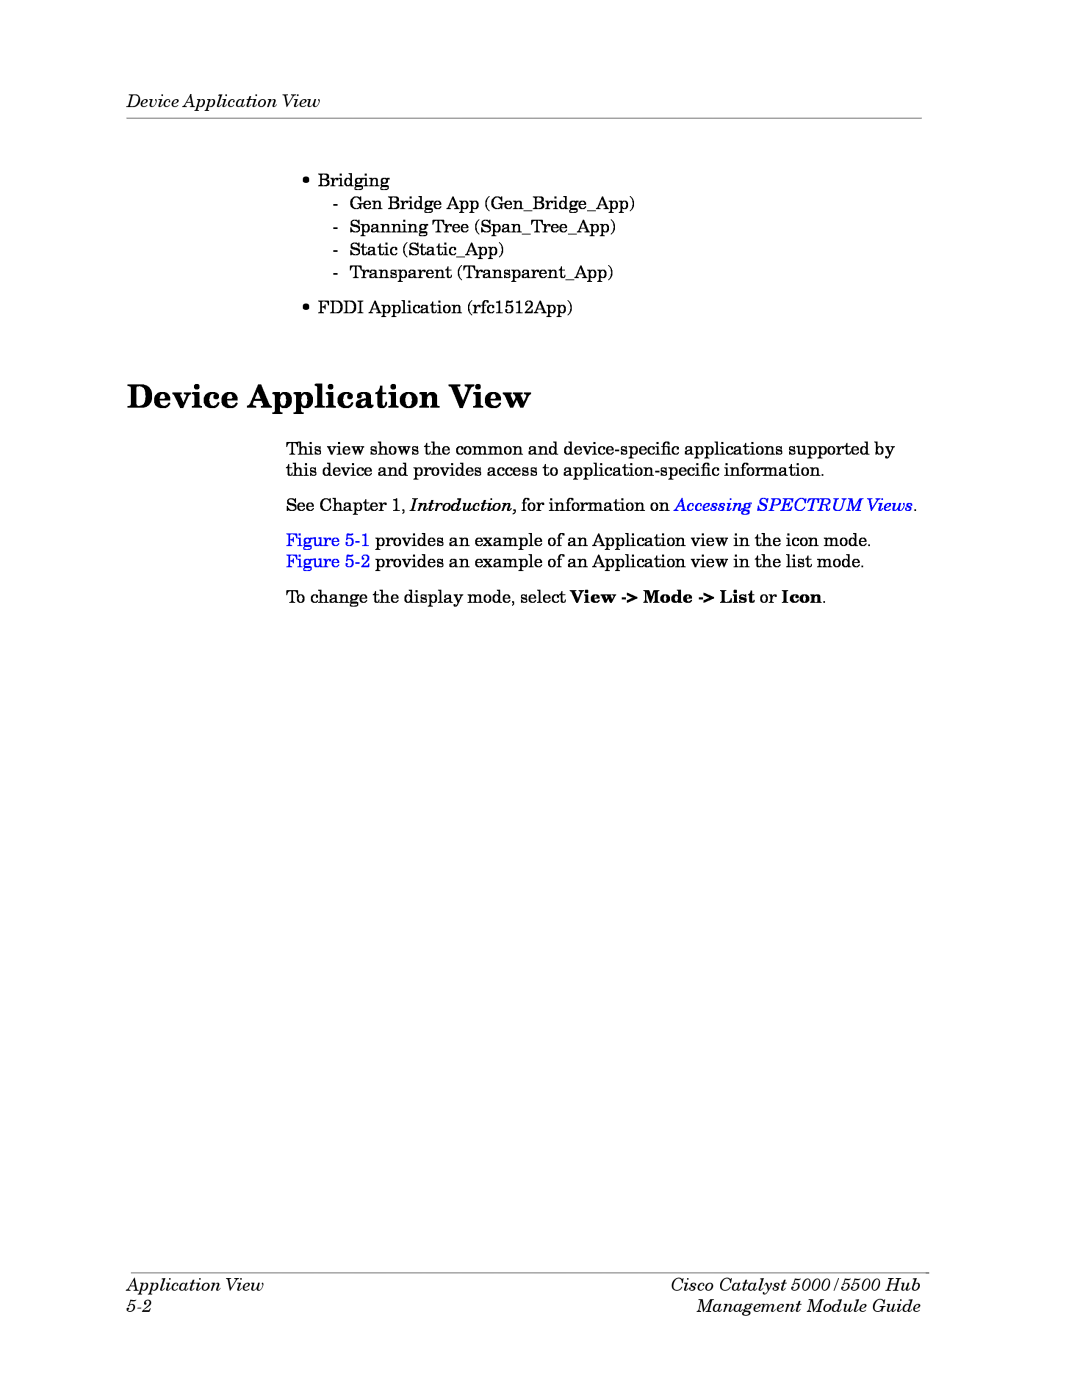 Cabletron Systems 5000, 5500 manual Device Application View, Cisco Catalyst 5000/5500 Hub, Management Module Guide 